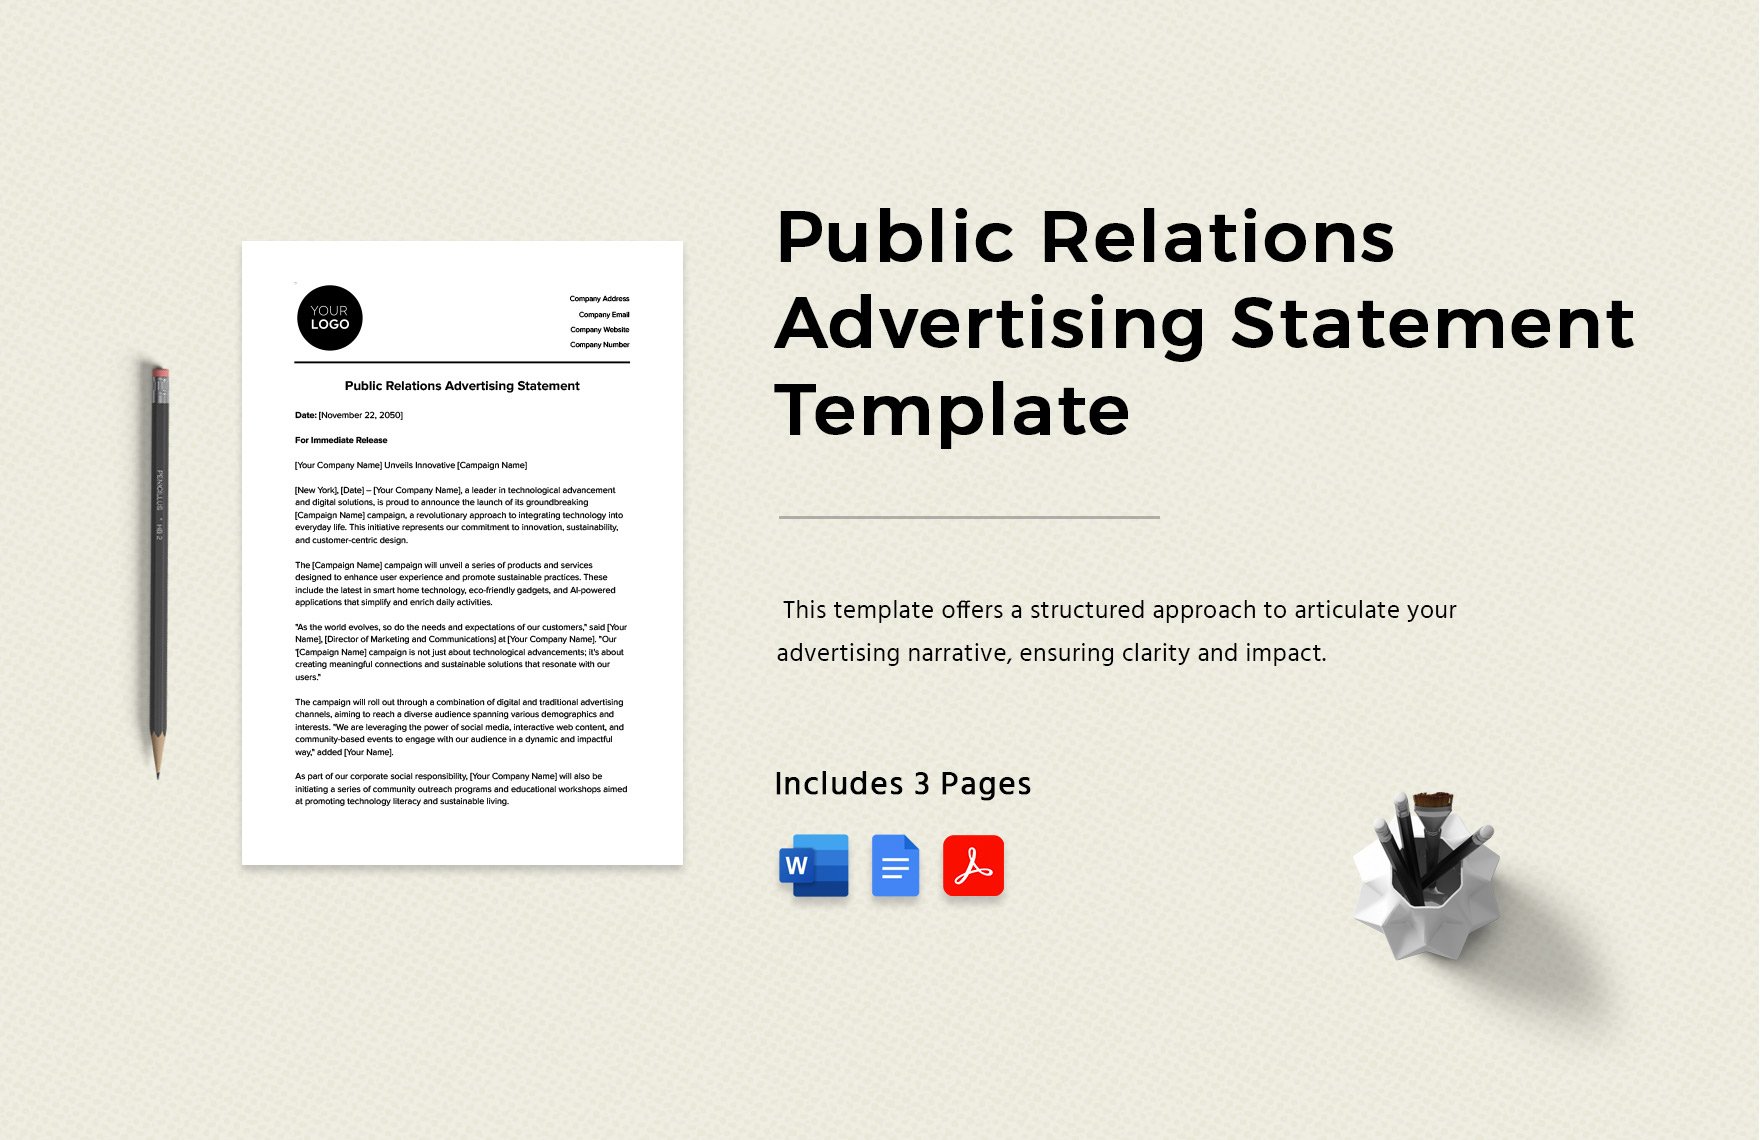 Public Relations Advertising Statement Template